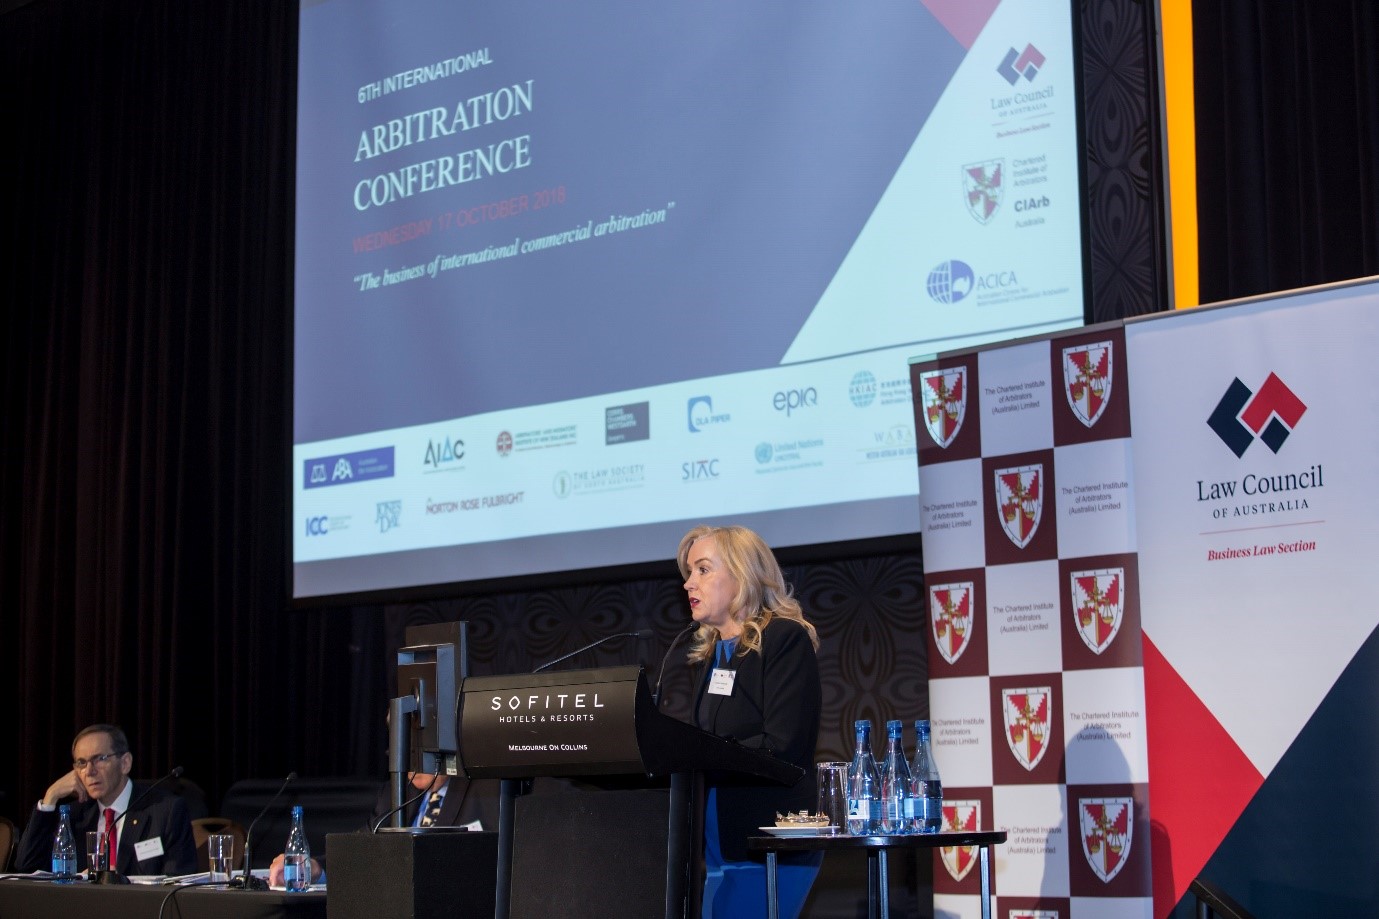 Caroline Kenny QC delivering the Welcome Address at 6th International Arbitration Conference